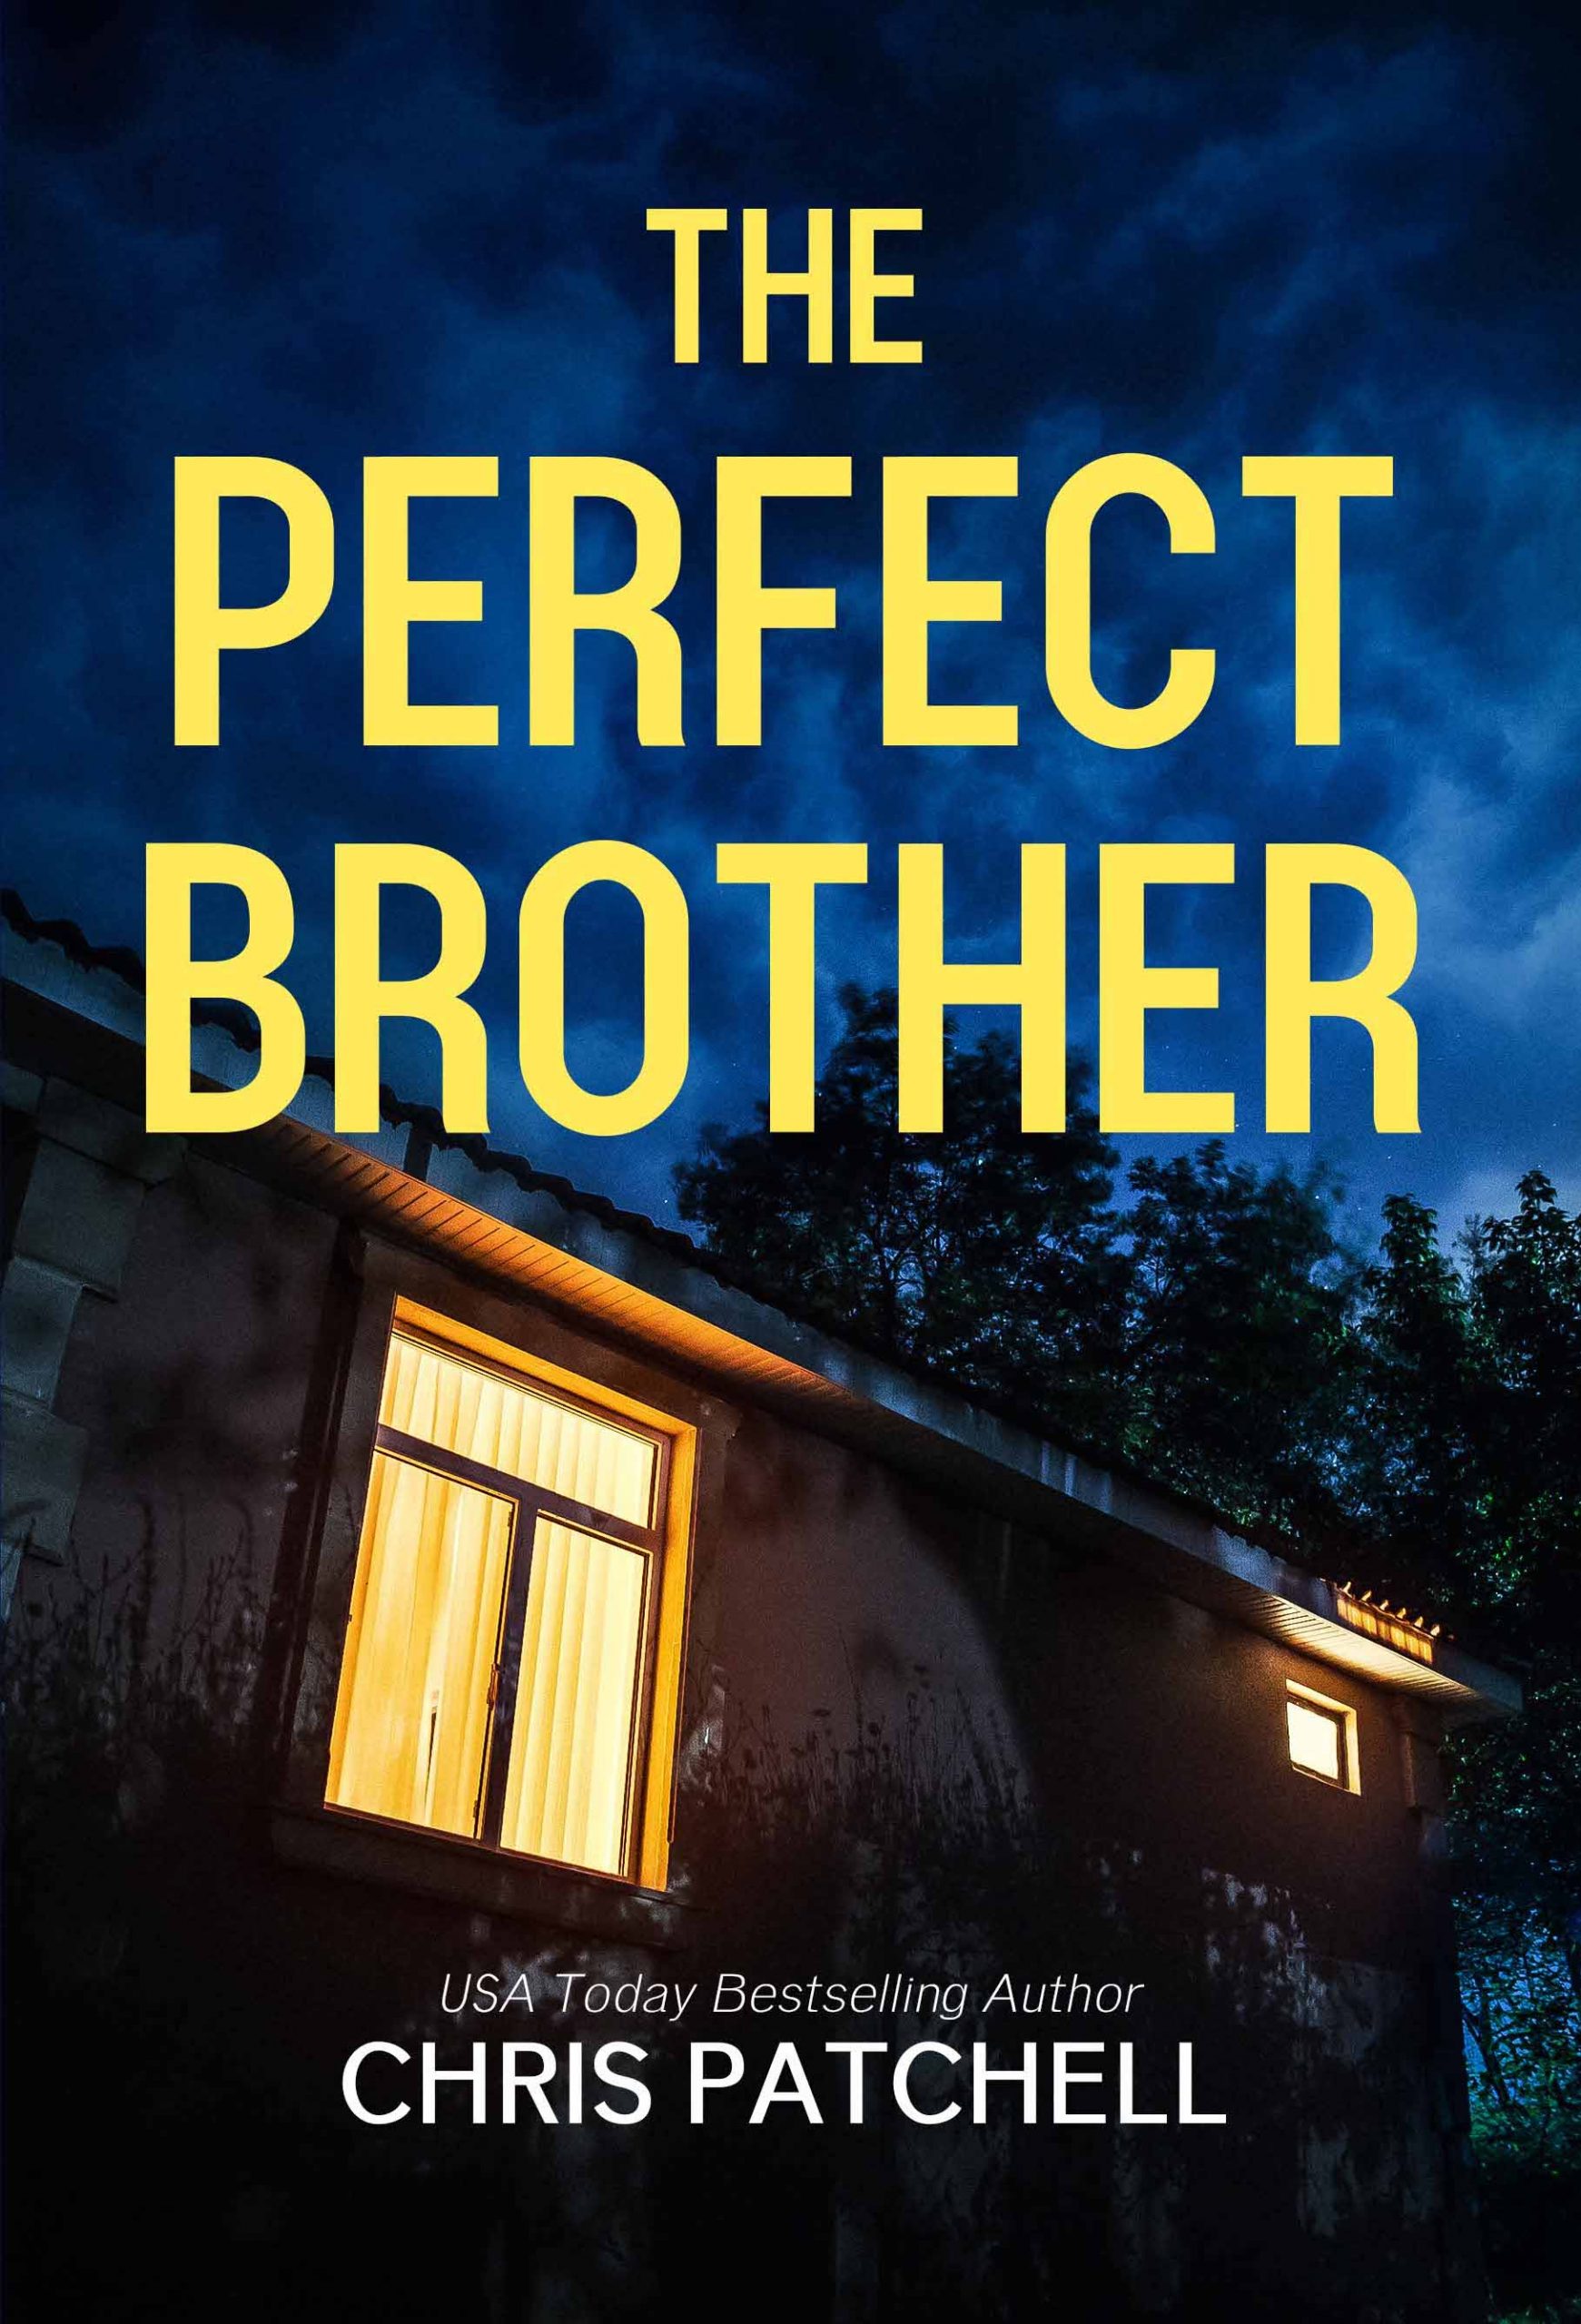 The Perfect Brother by Chris Patchell